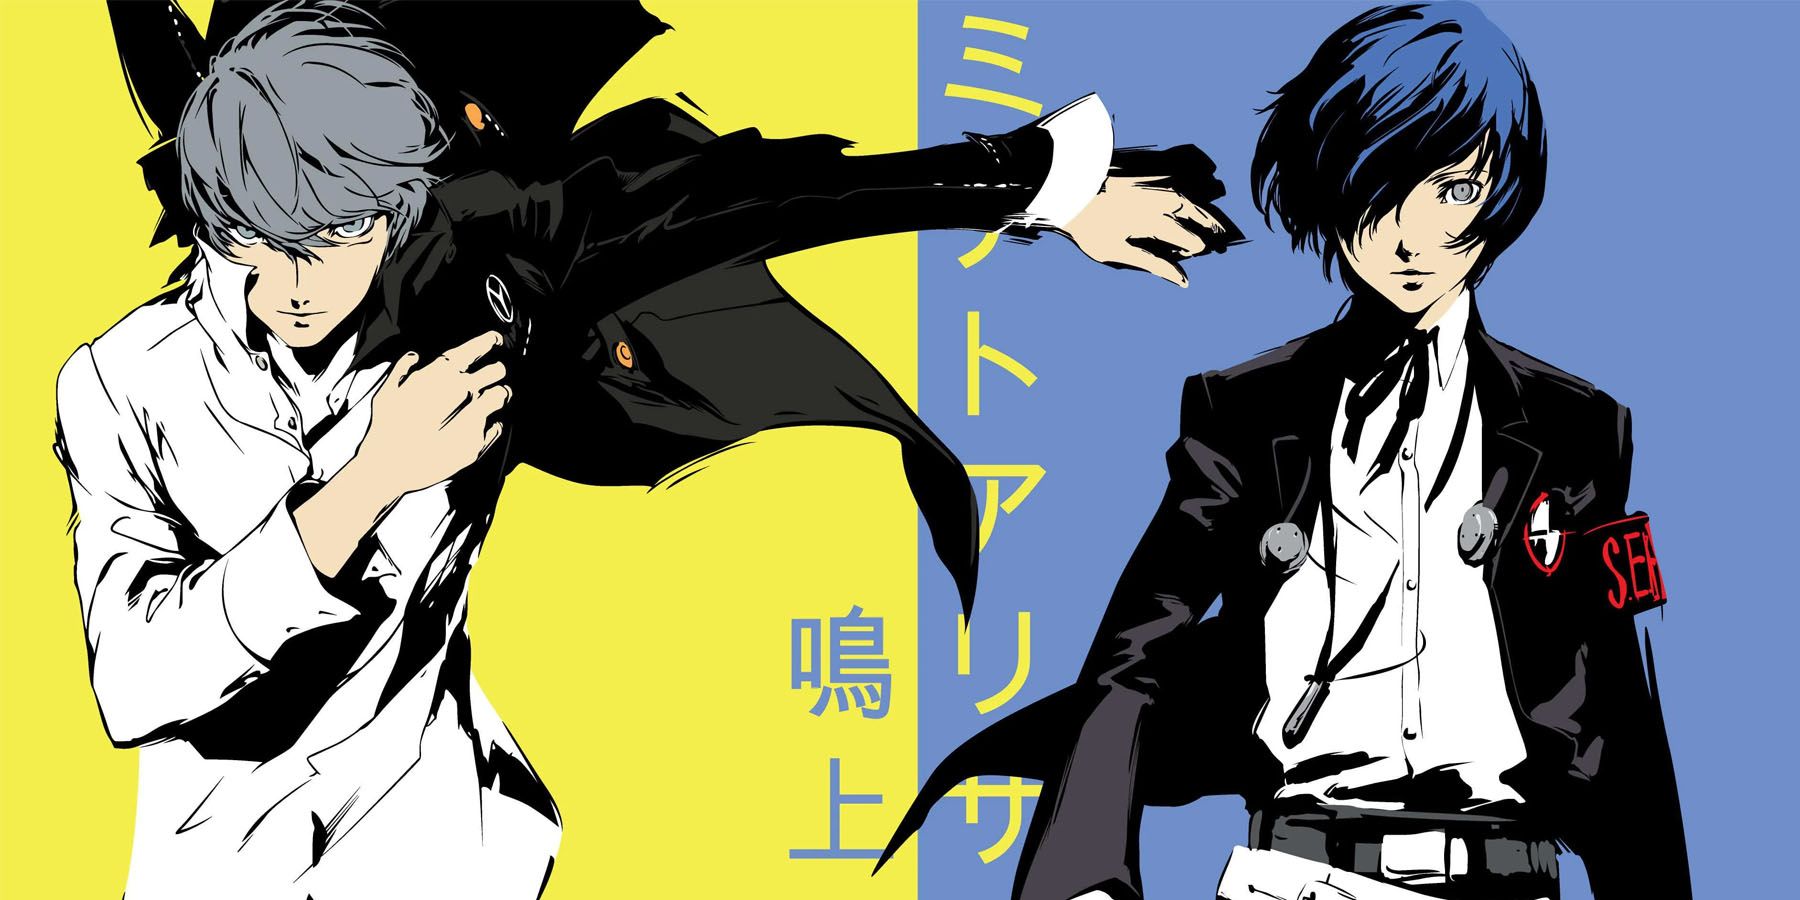 Atlus confirms PS4 versions of Persona 4 Golden and Persona 3 Portable